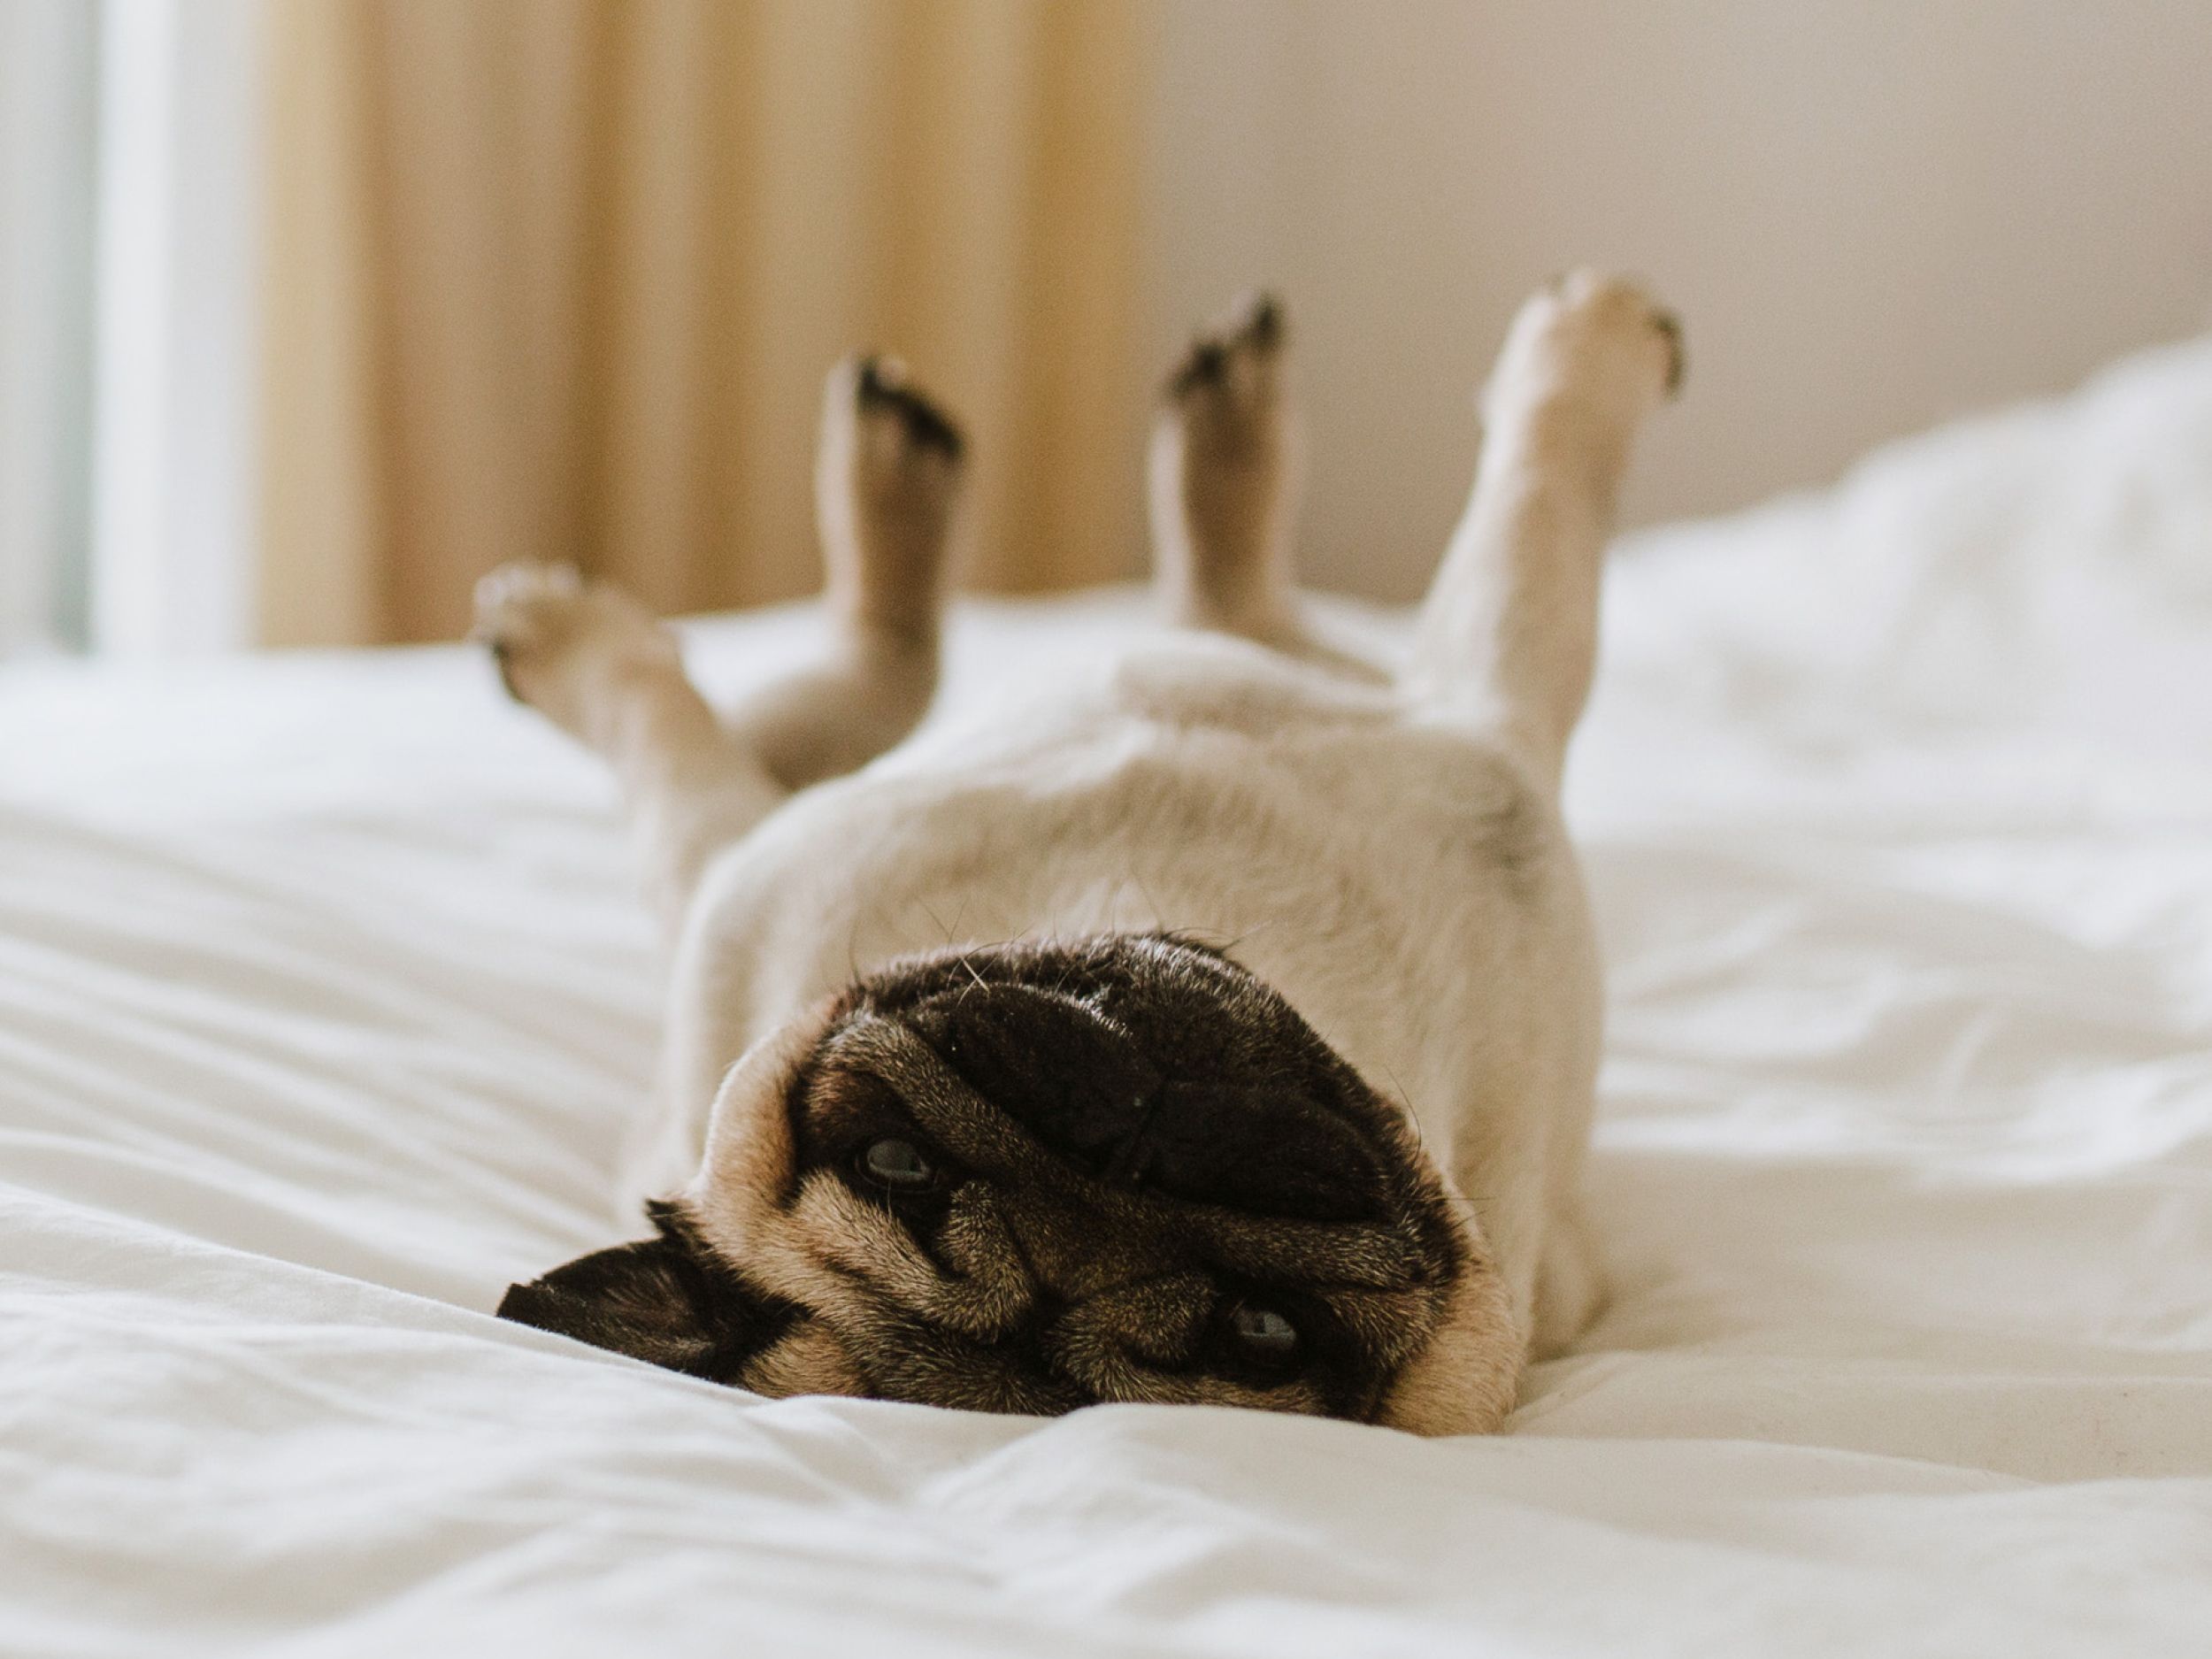 Upside down pug with legs in the air on a white hotel bed